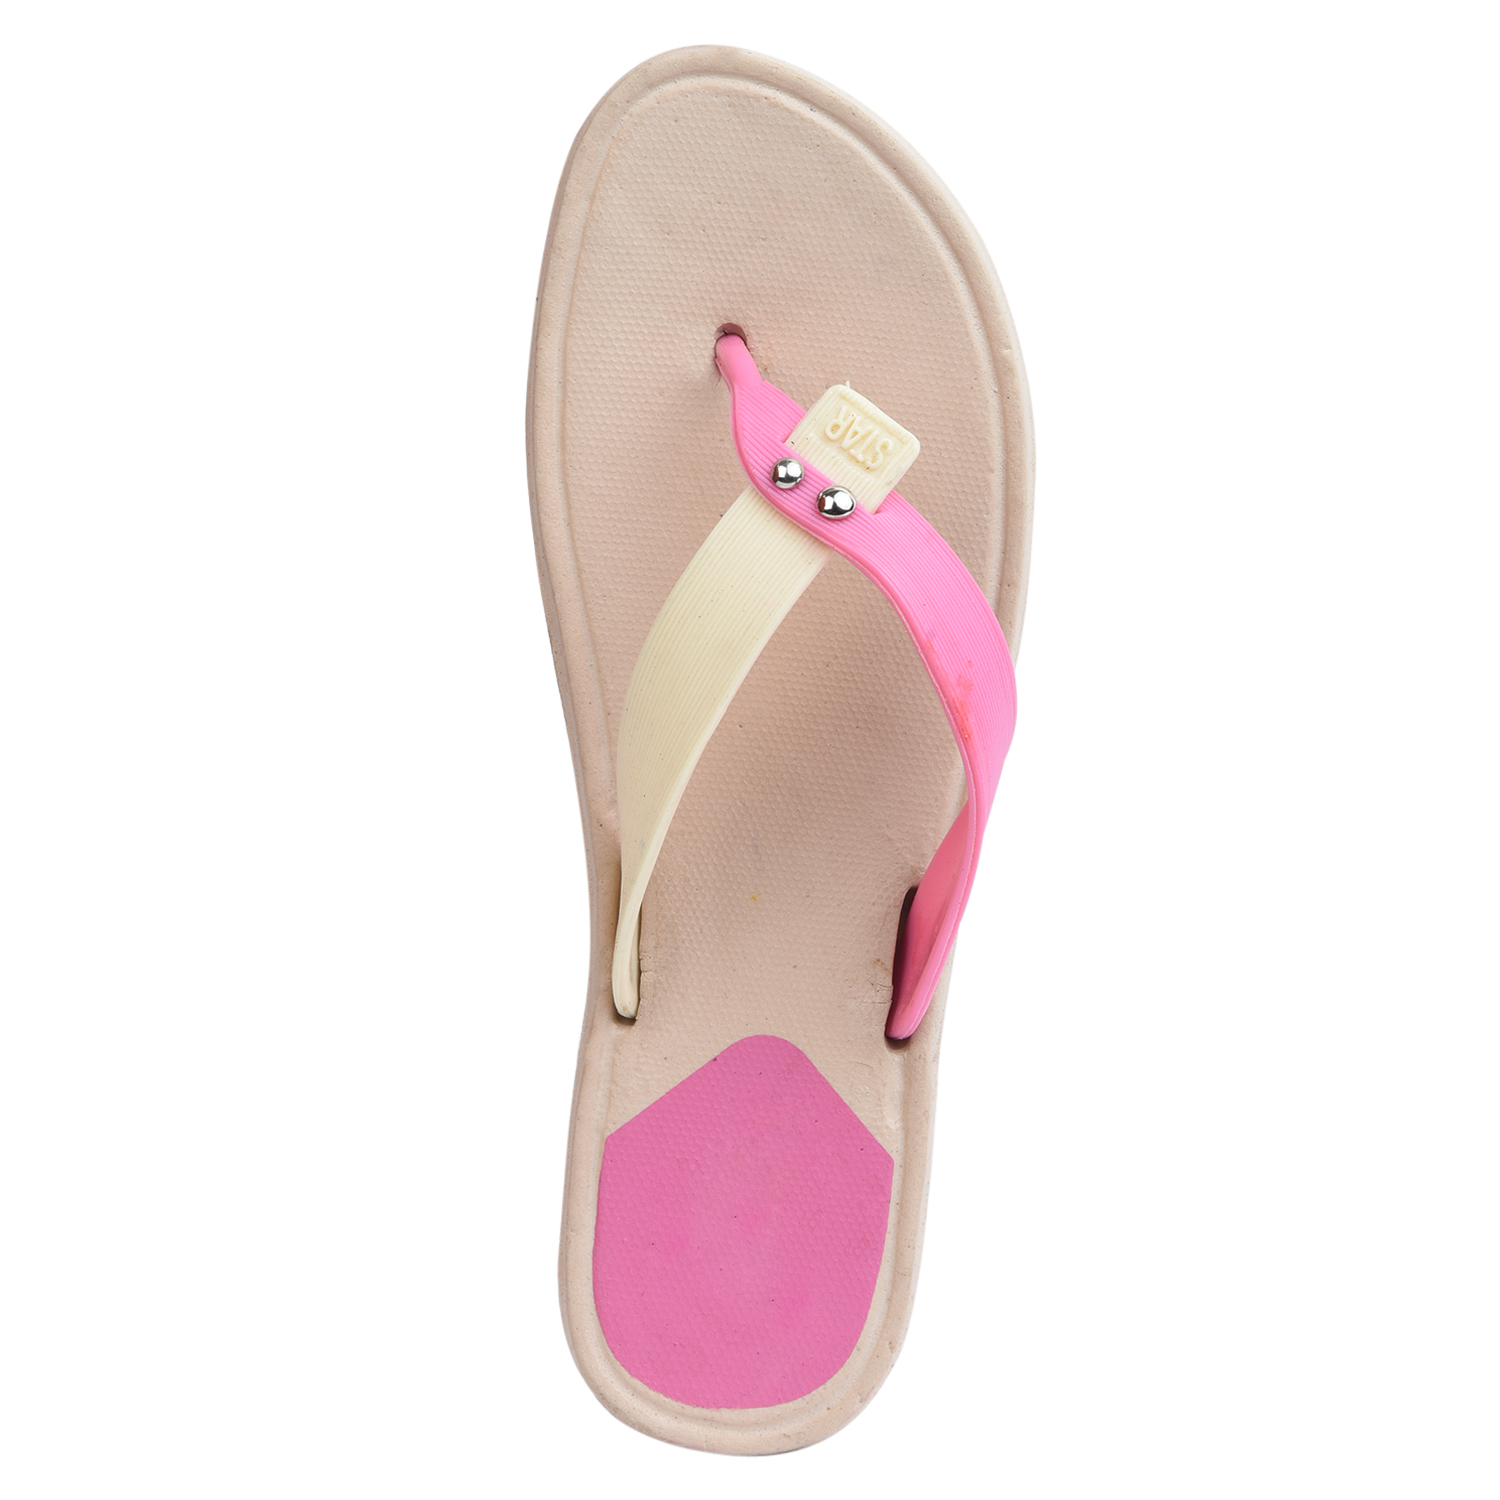 Buy Women's Pink Slippers Online @ ₹299 from ShopClues